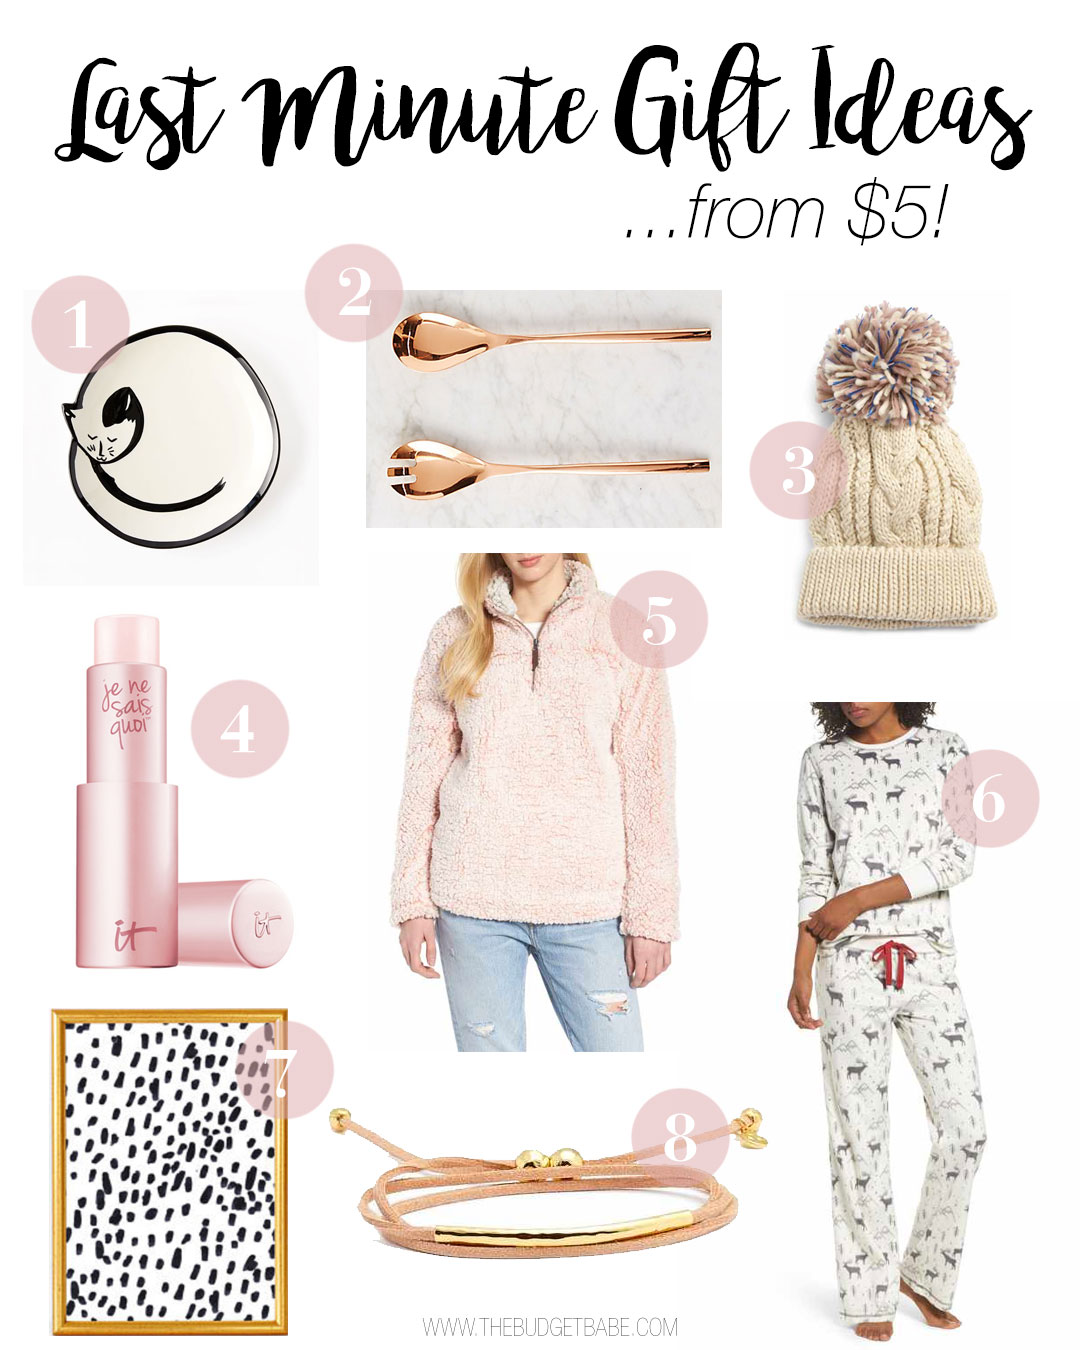 Last Minute gift ideas for girlfriends, sisters, mom and more! From just $5! Fashionable on-trend picks